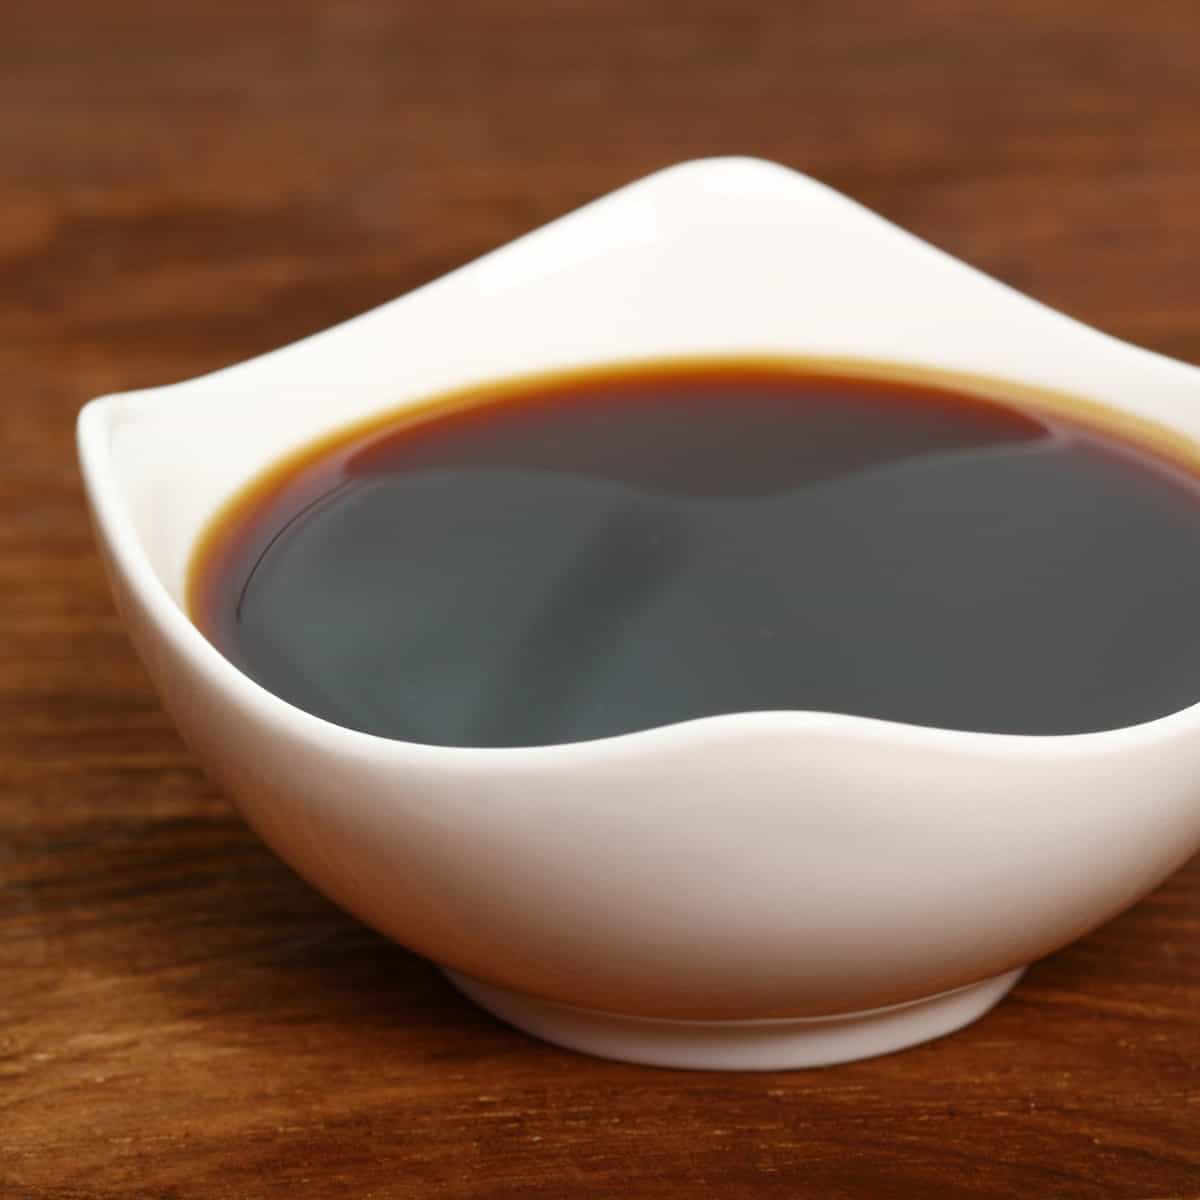 Soy sauce in a white bowl.